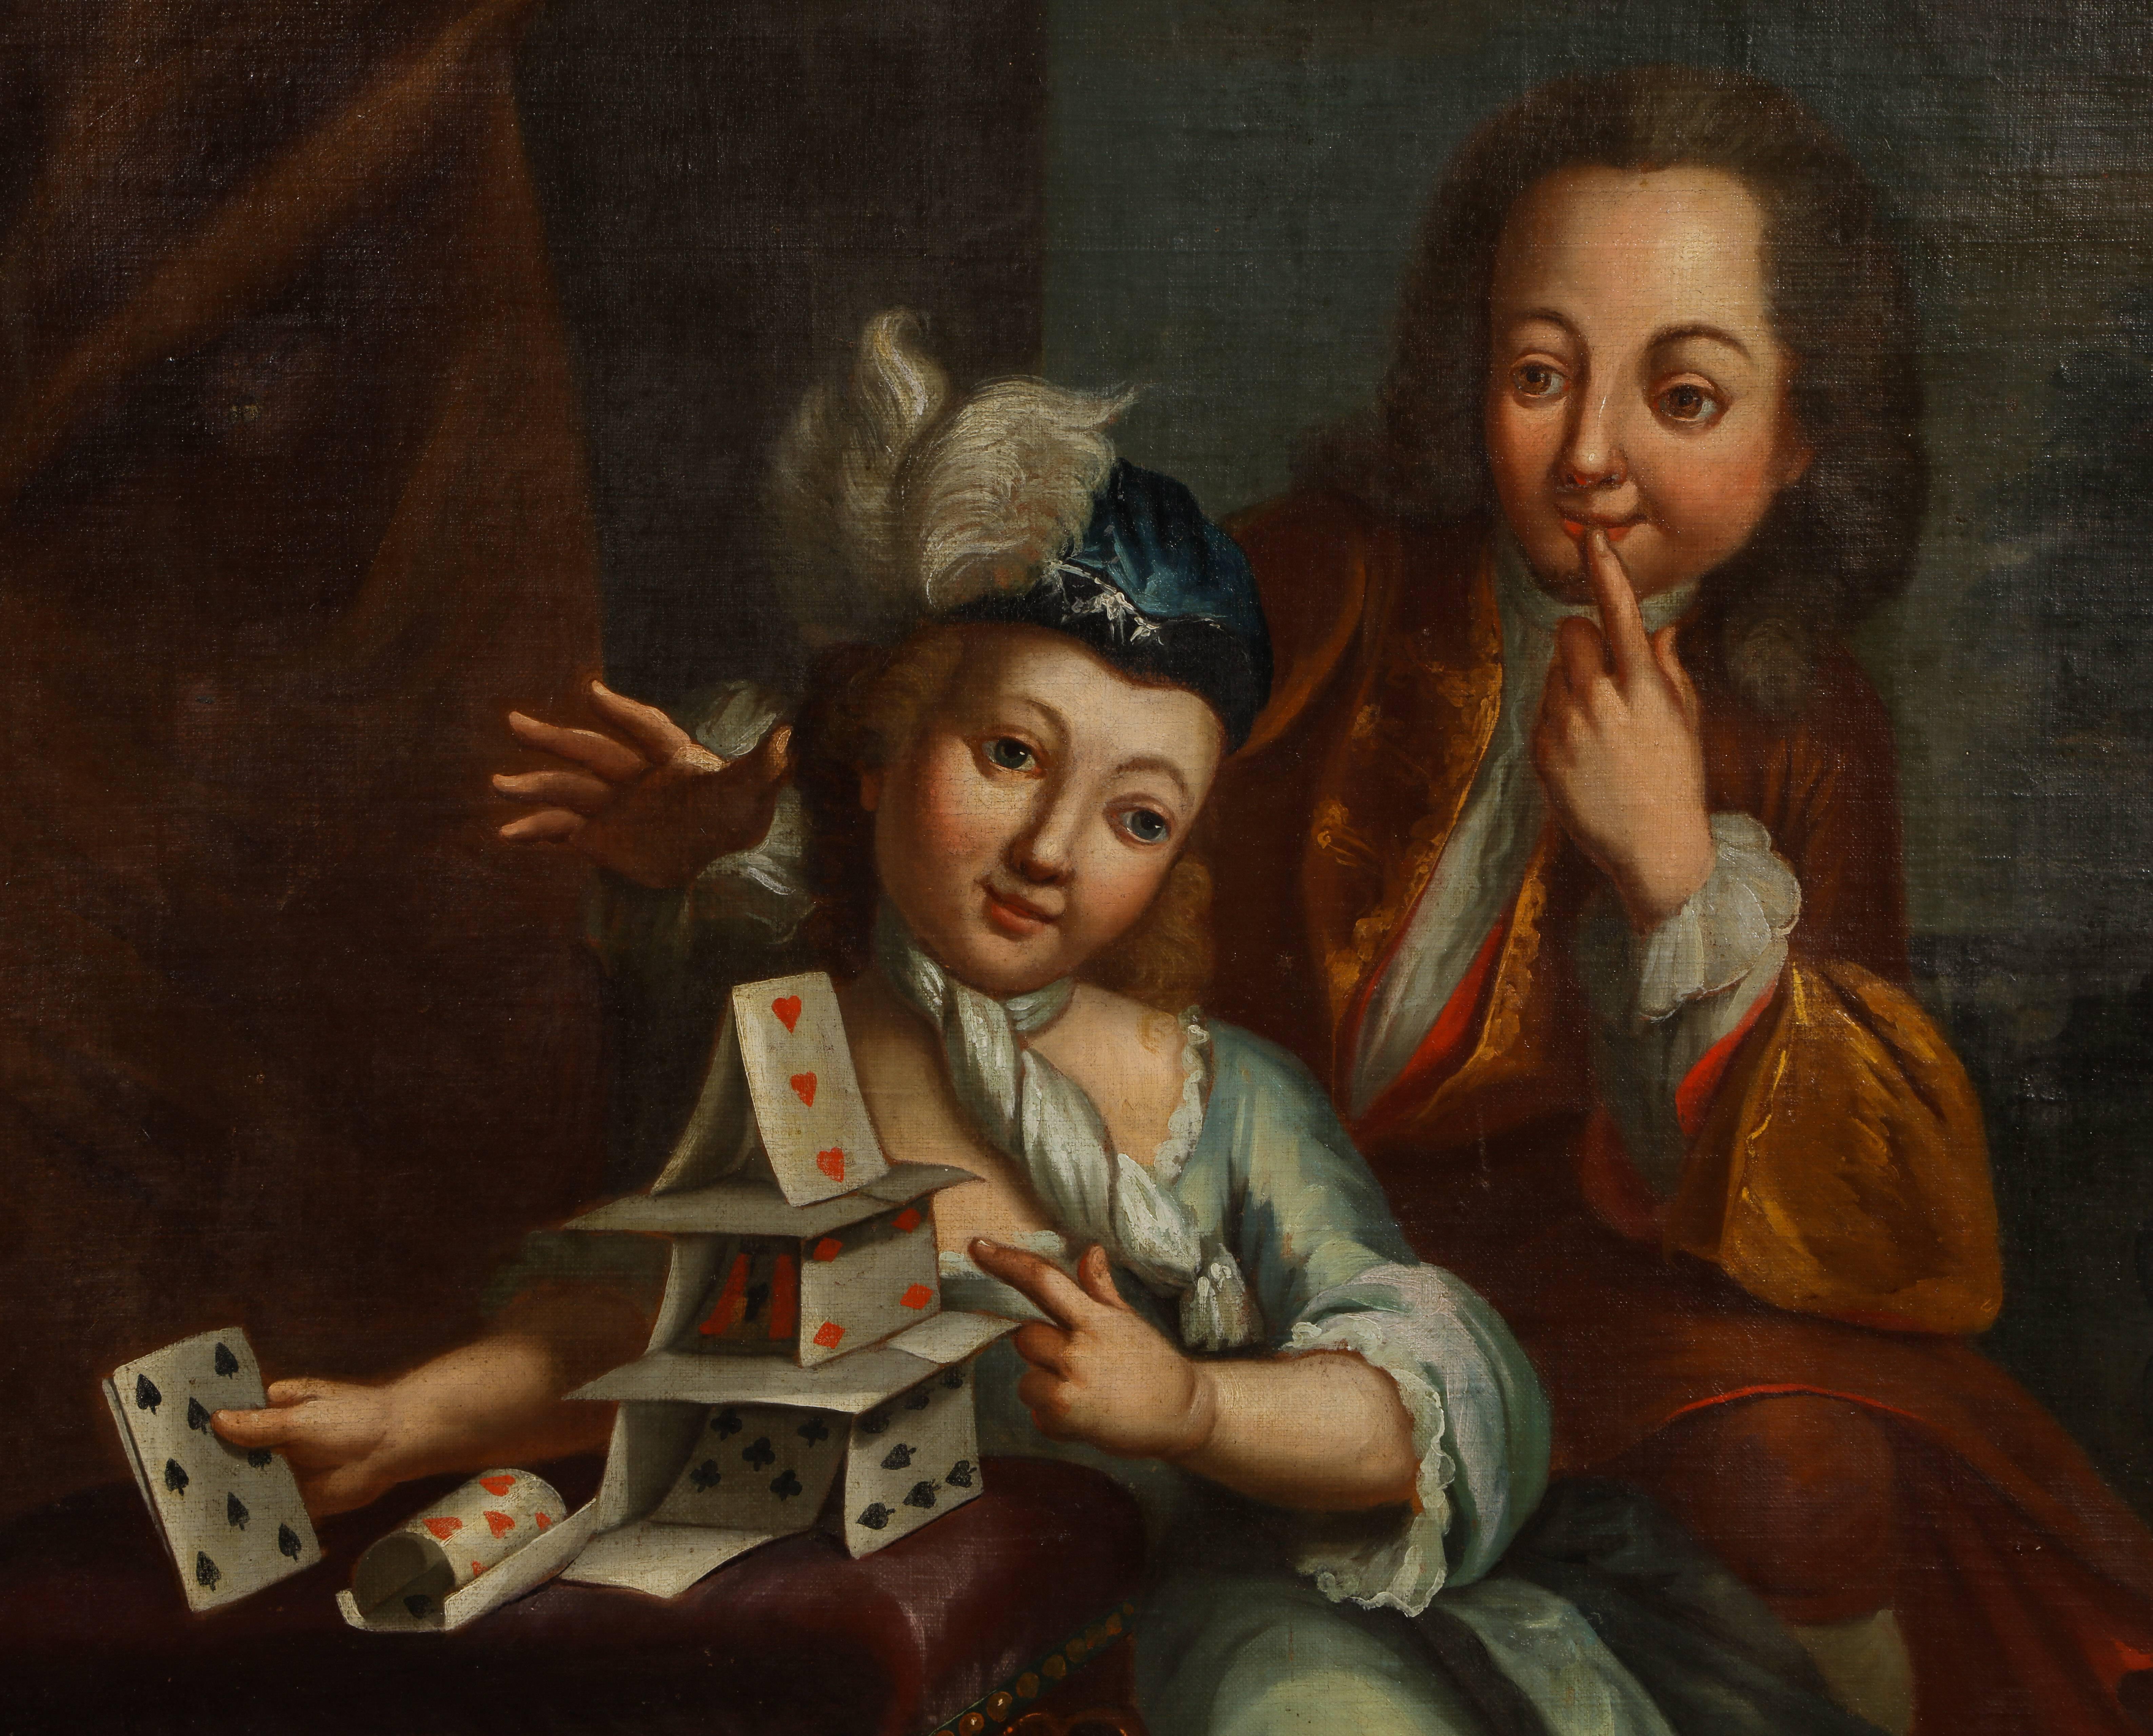 A large and charming German 18th century oil painting, House of Cards, depicting a gentleman and young girl at play in elegant dress.
Oil on canvas.
German, 18th century.
Size: 49